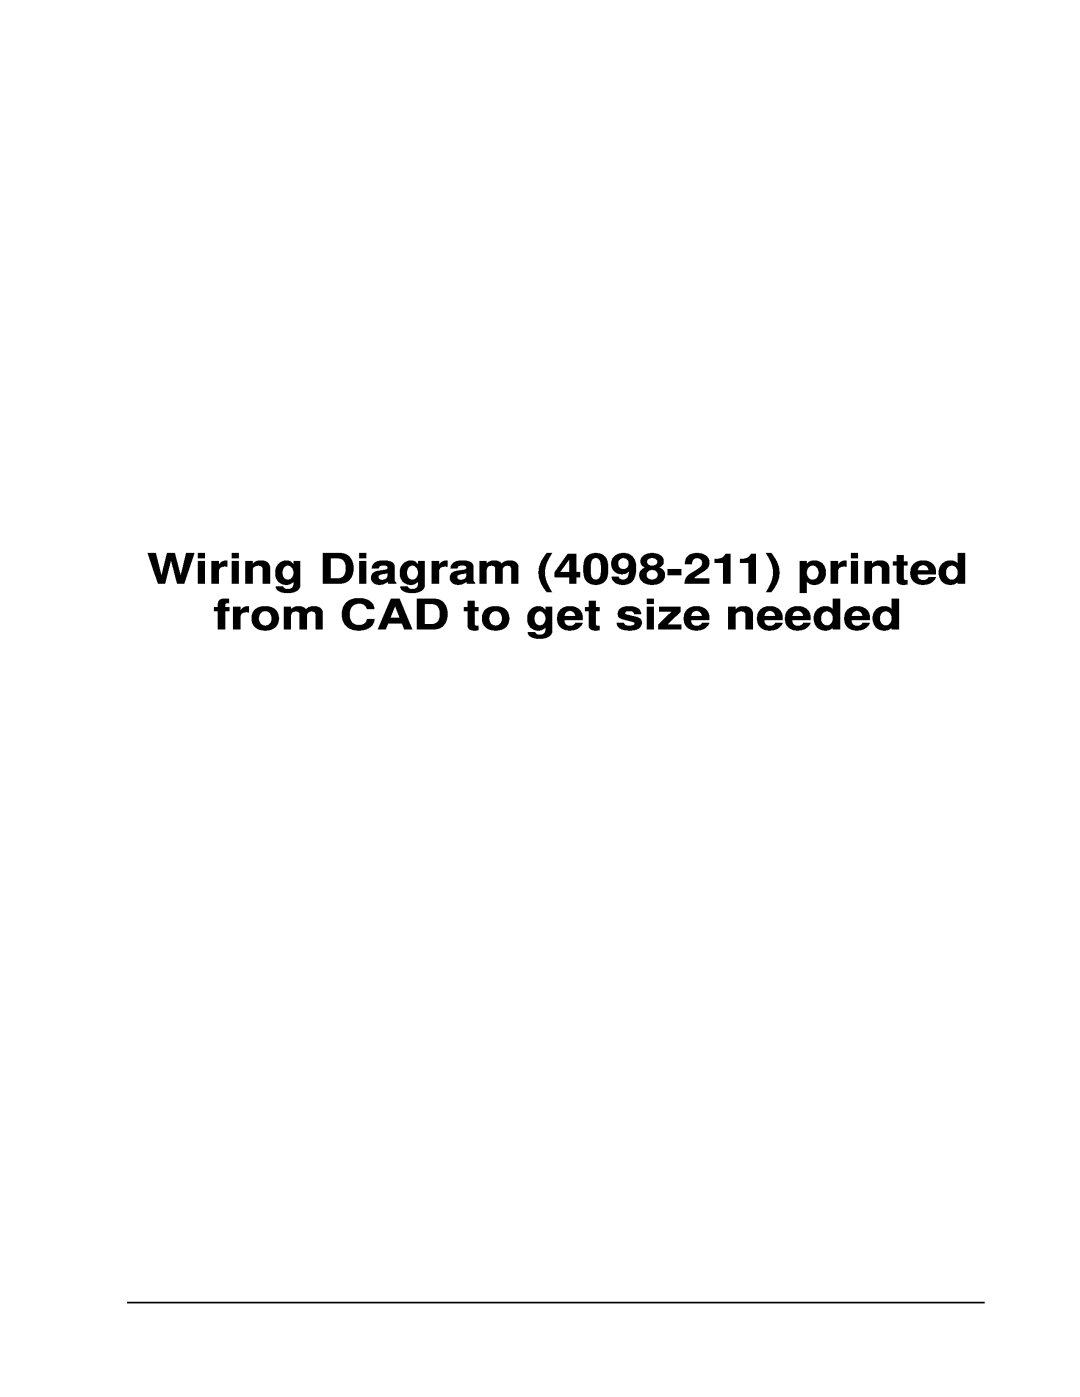 Bard PH1224, PH1230, PH1236 Wiring Diagram 4098-211printed, from CAD to get size needed, Manual 2100-344Page 